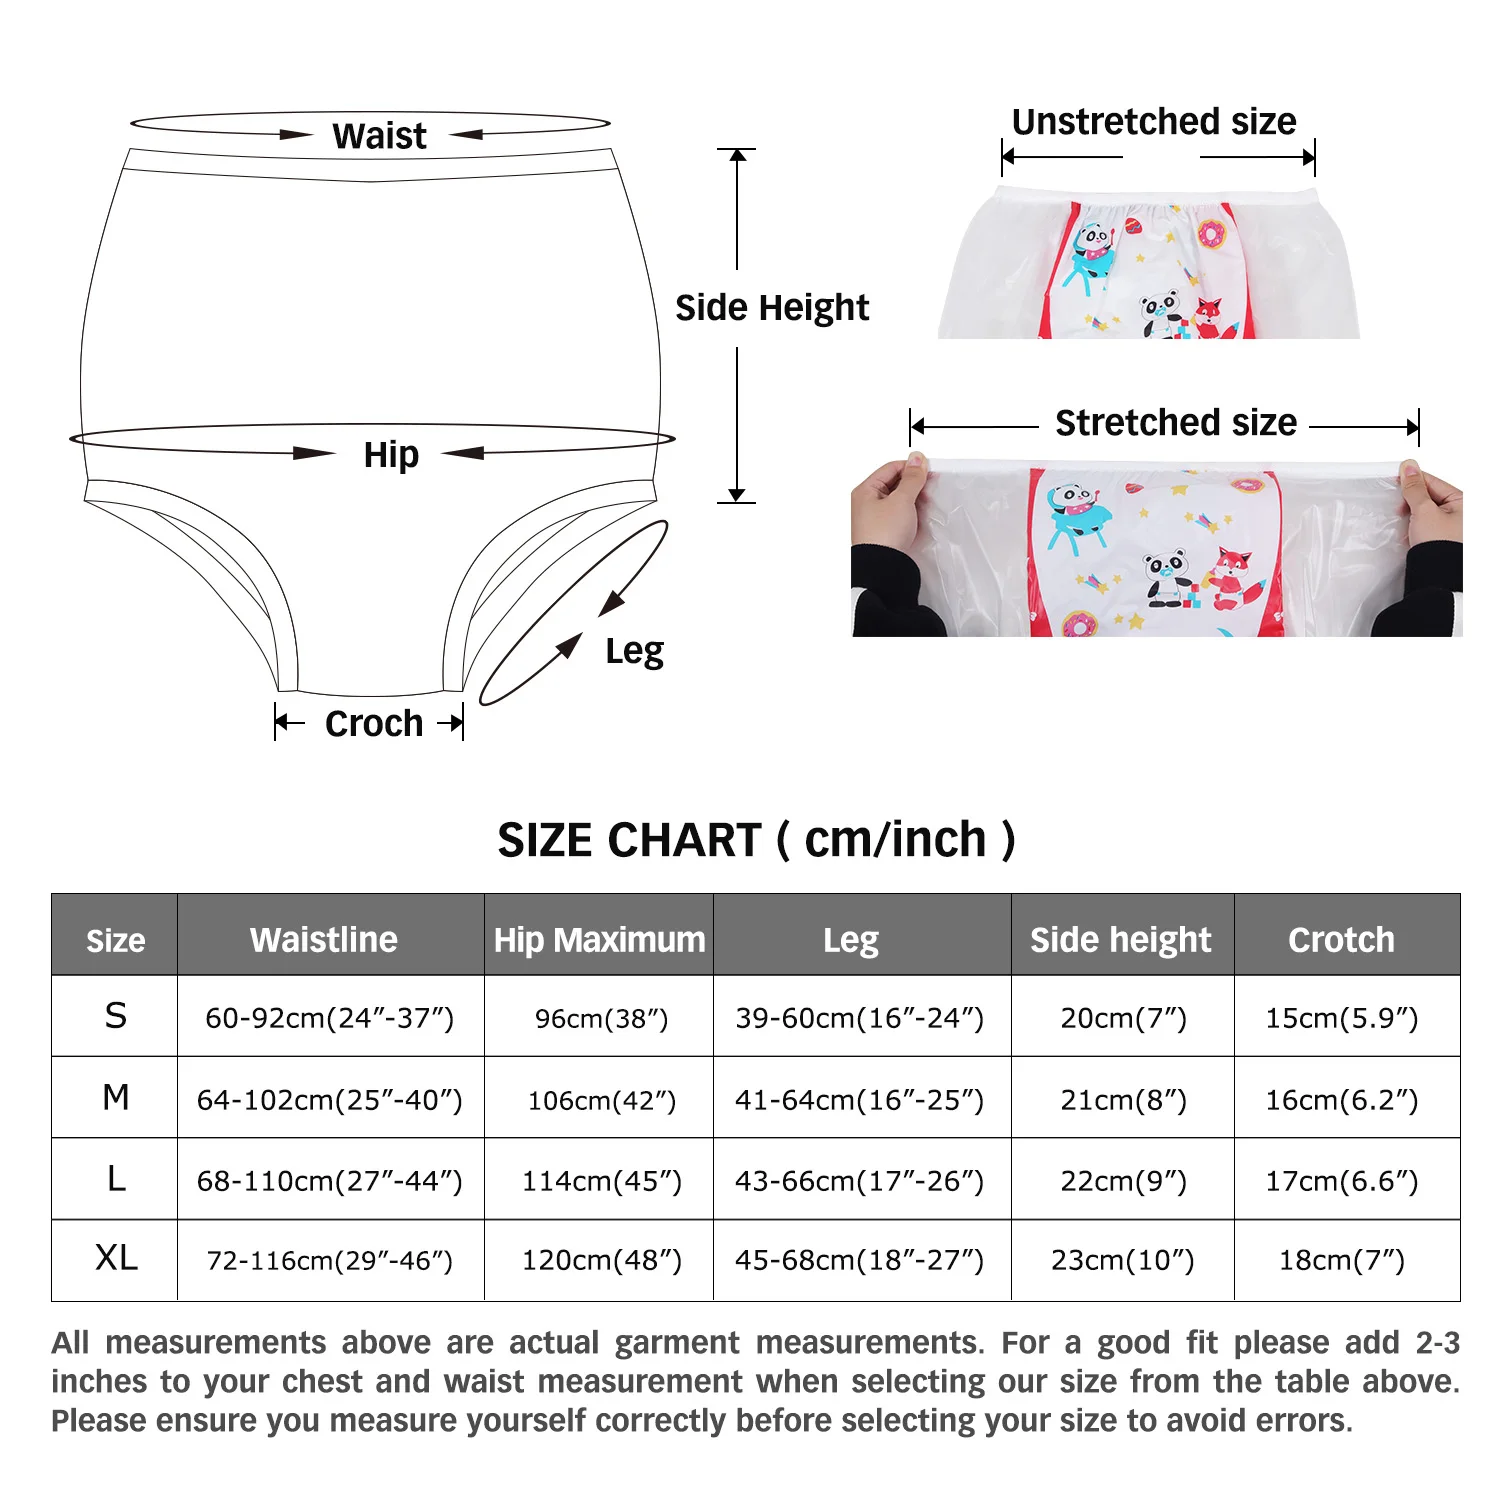 14 styles ddlg adult diapers pvc reusable baby pants diapers onesize plastic bikini pants abdl adult baby new underwear diapers images - 6